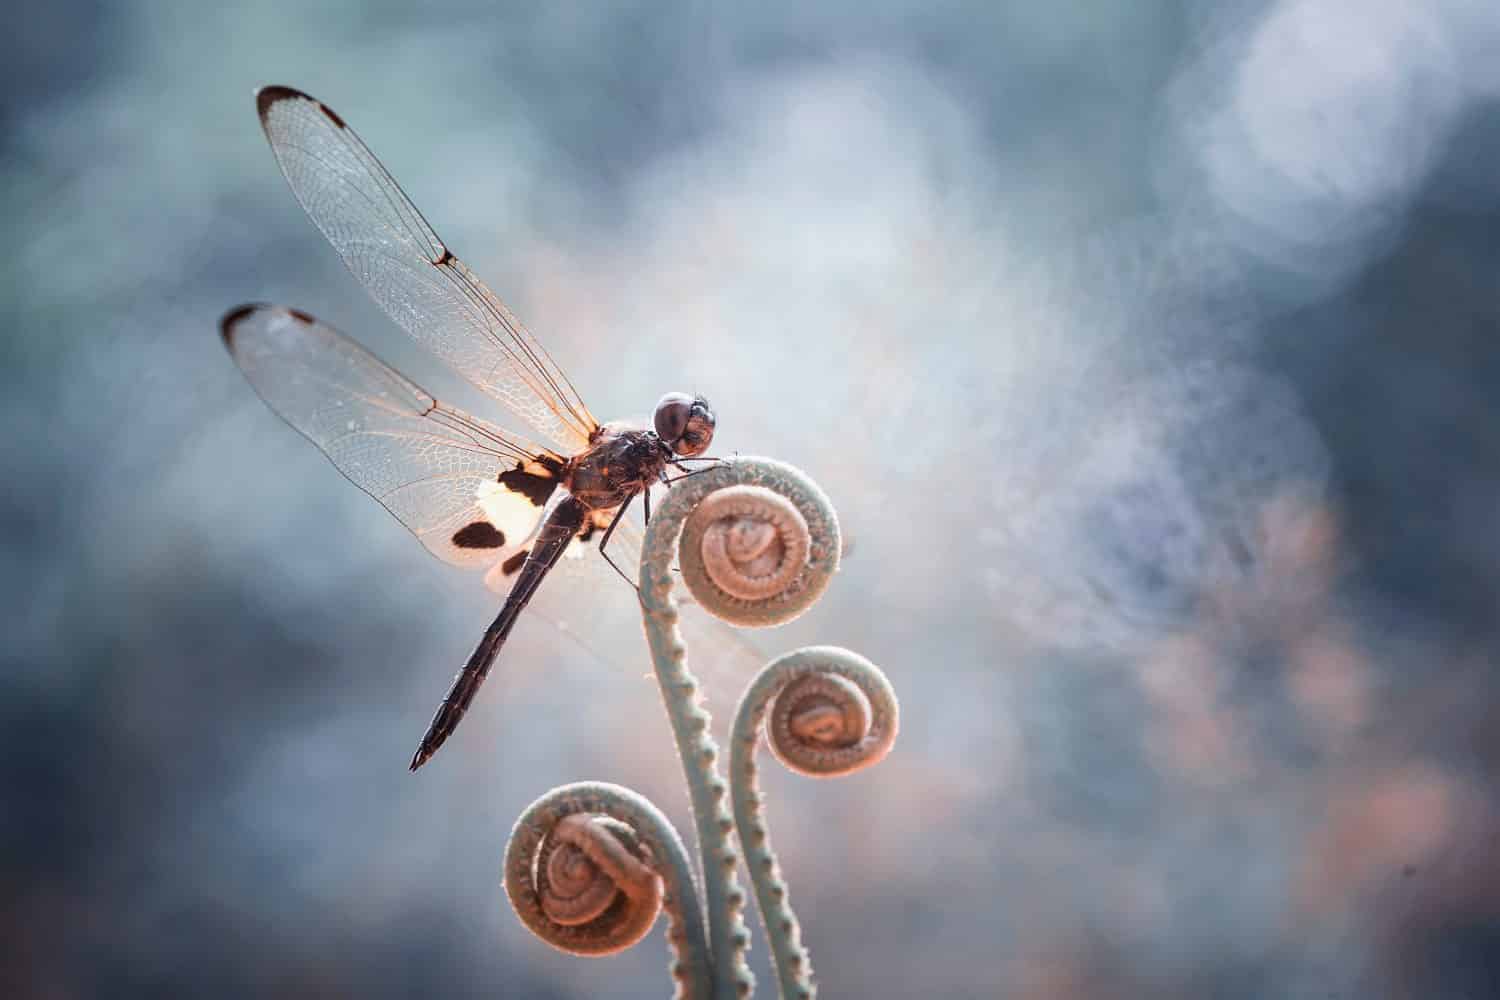 Dragonflies are insects that have many types, shapes and colors, usually living in watery places, riverbanks, lakes or swamps. This is one type of dragonfly on the island of Kalimantan